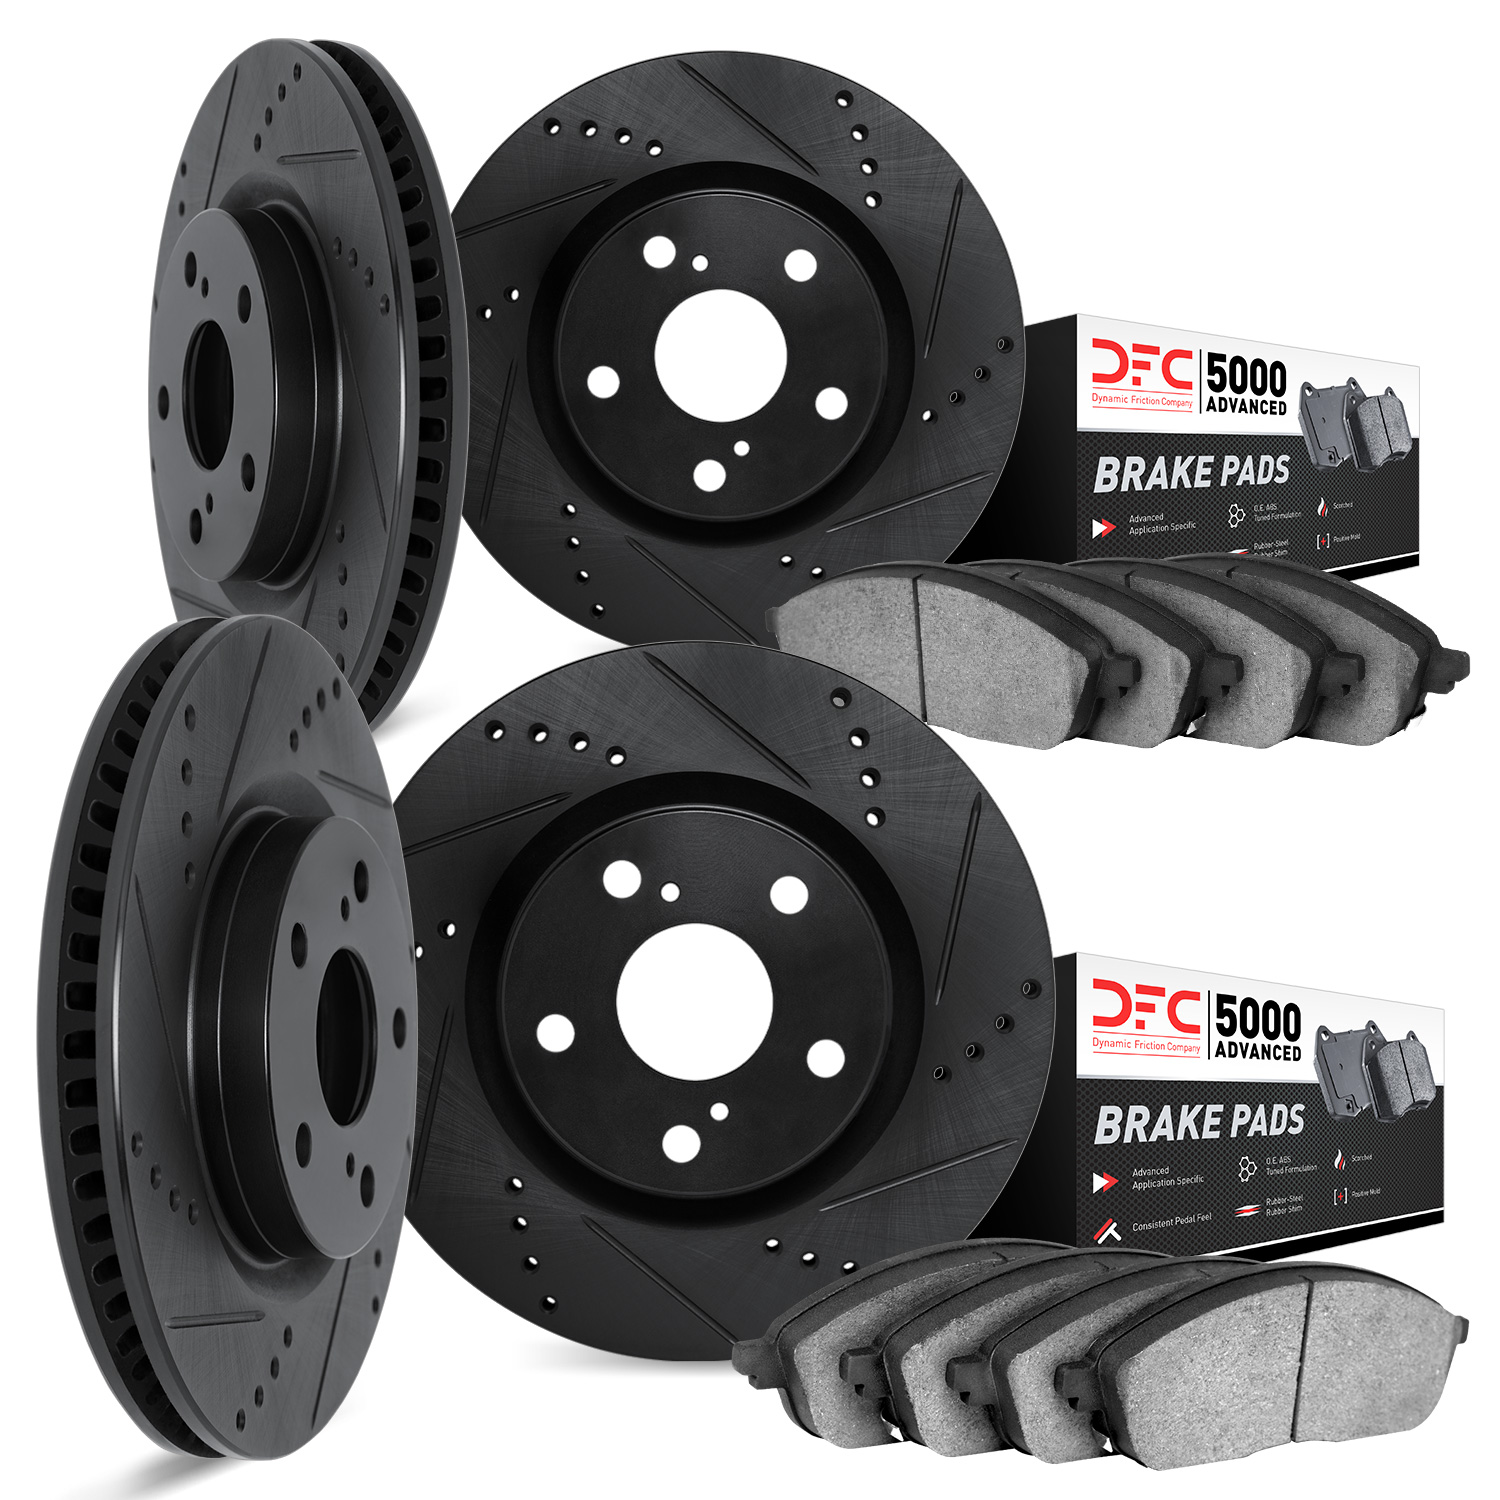 8504-75002 Drilled/Slotted Brake Rotors w/5000 Advanced Brake Pads Kit [Black], 1995-2000 Lexus/Toyota/Scion, Position: Front an